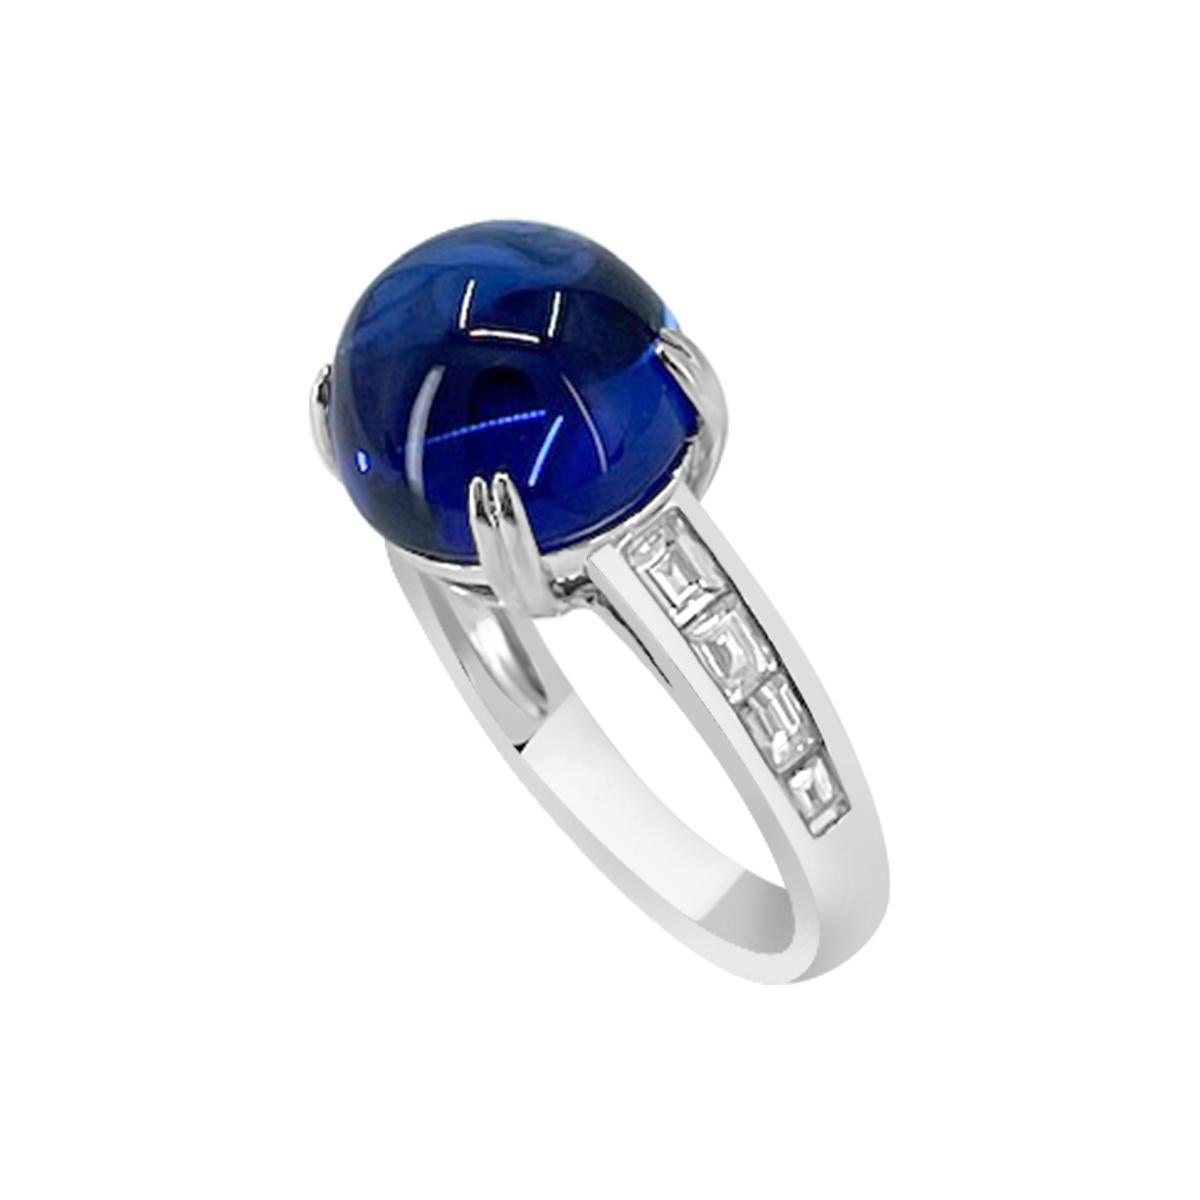 Elegant 11mm cabochon round tanzanite ring. Fine blue color. With white diamonds on both shanks will make any finger look stunning.

Style# R3521
Tanzanite: 11mm Cabochon Round 7.92cts
Diamond: 8pcs 0.49cts
